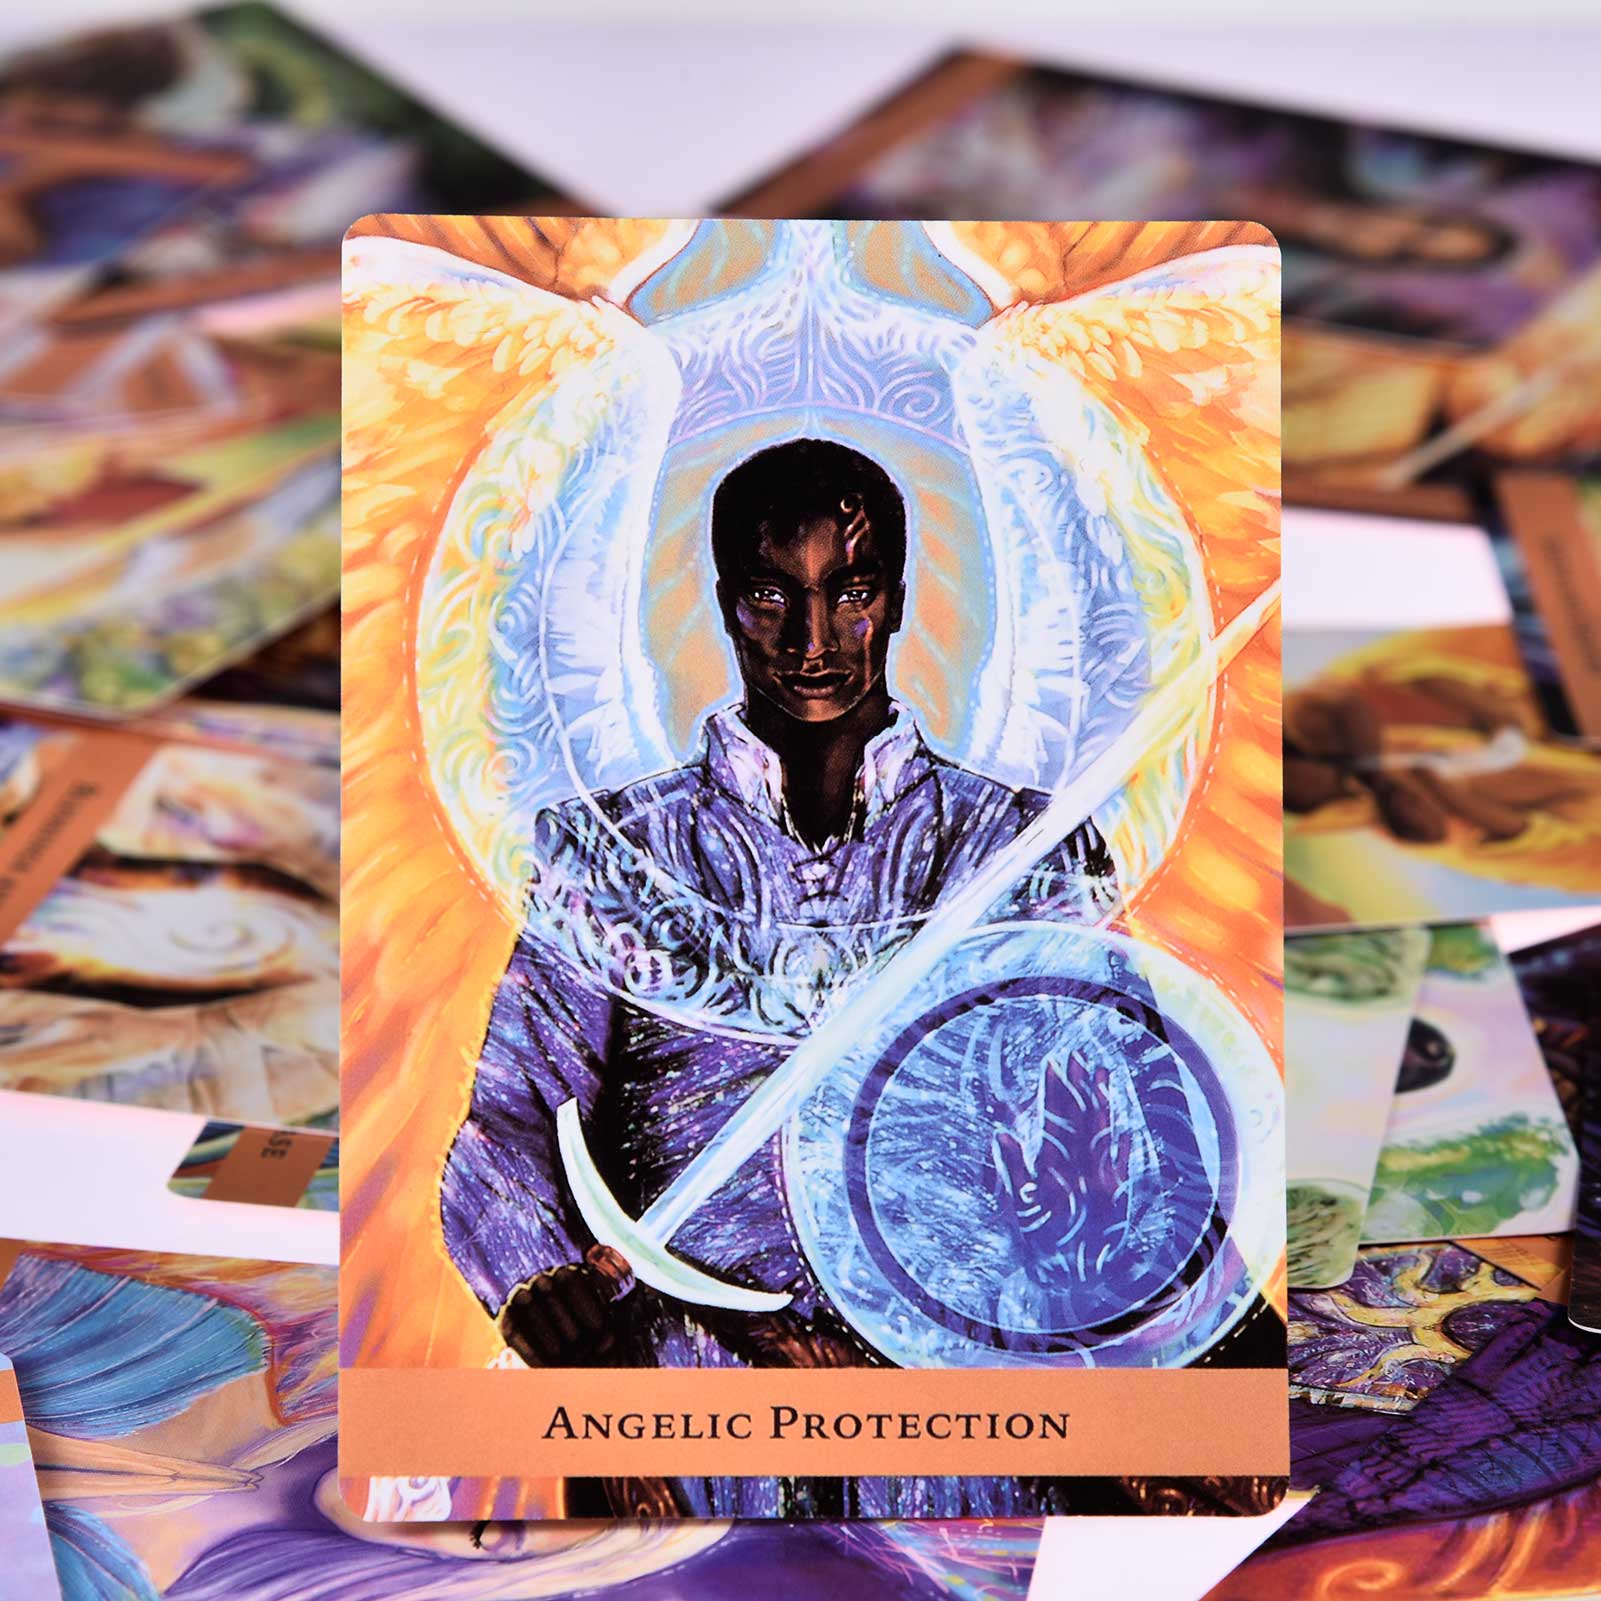 The Angel Guide Oracle Cards